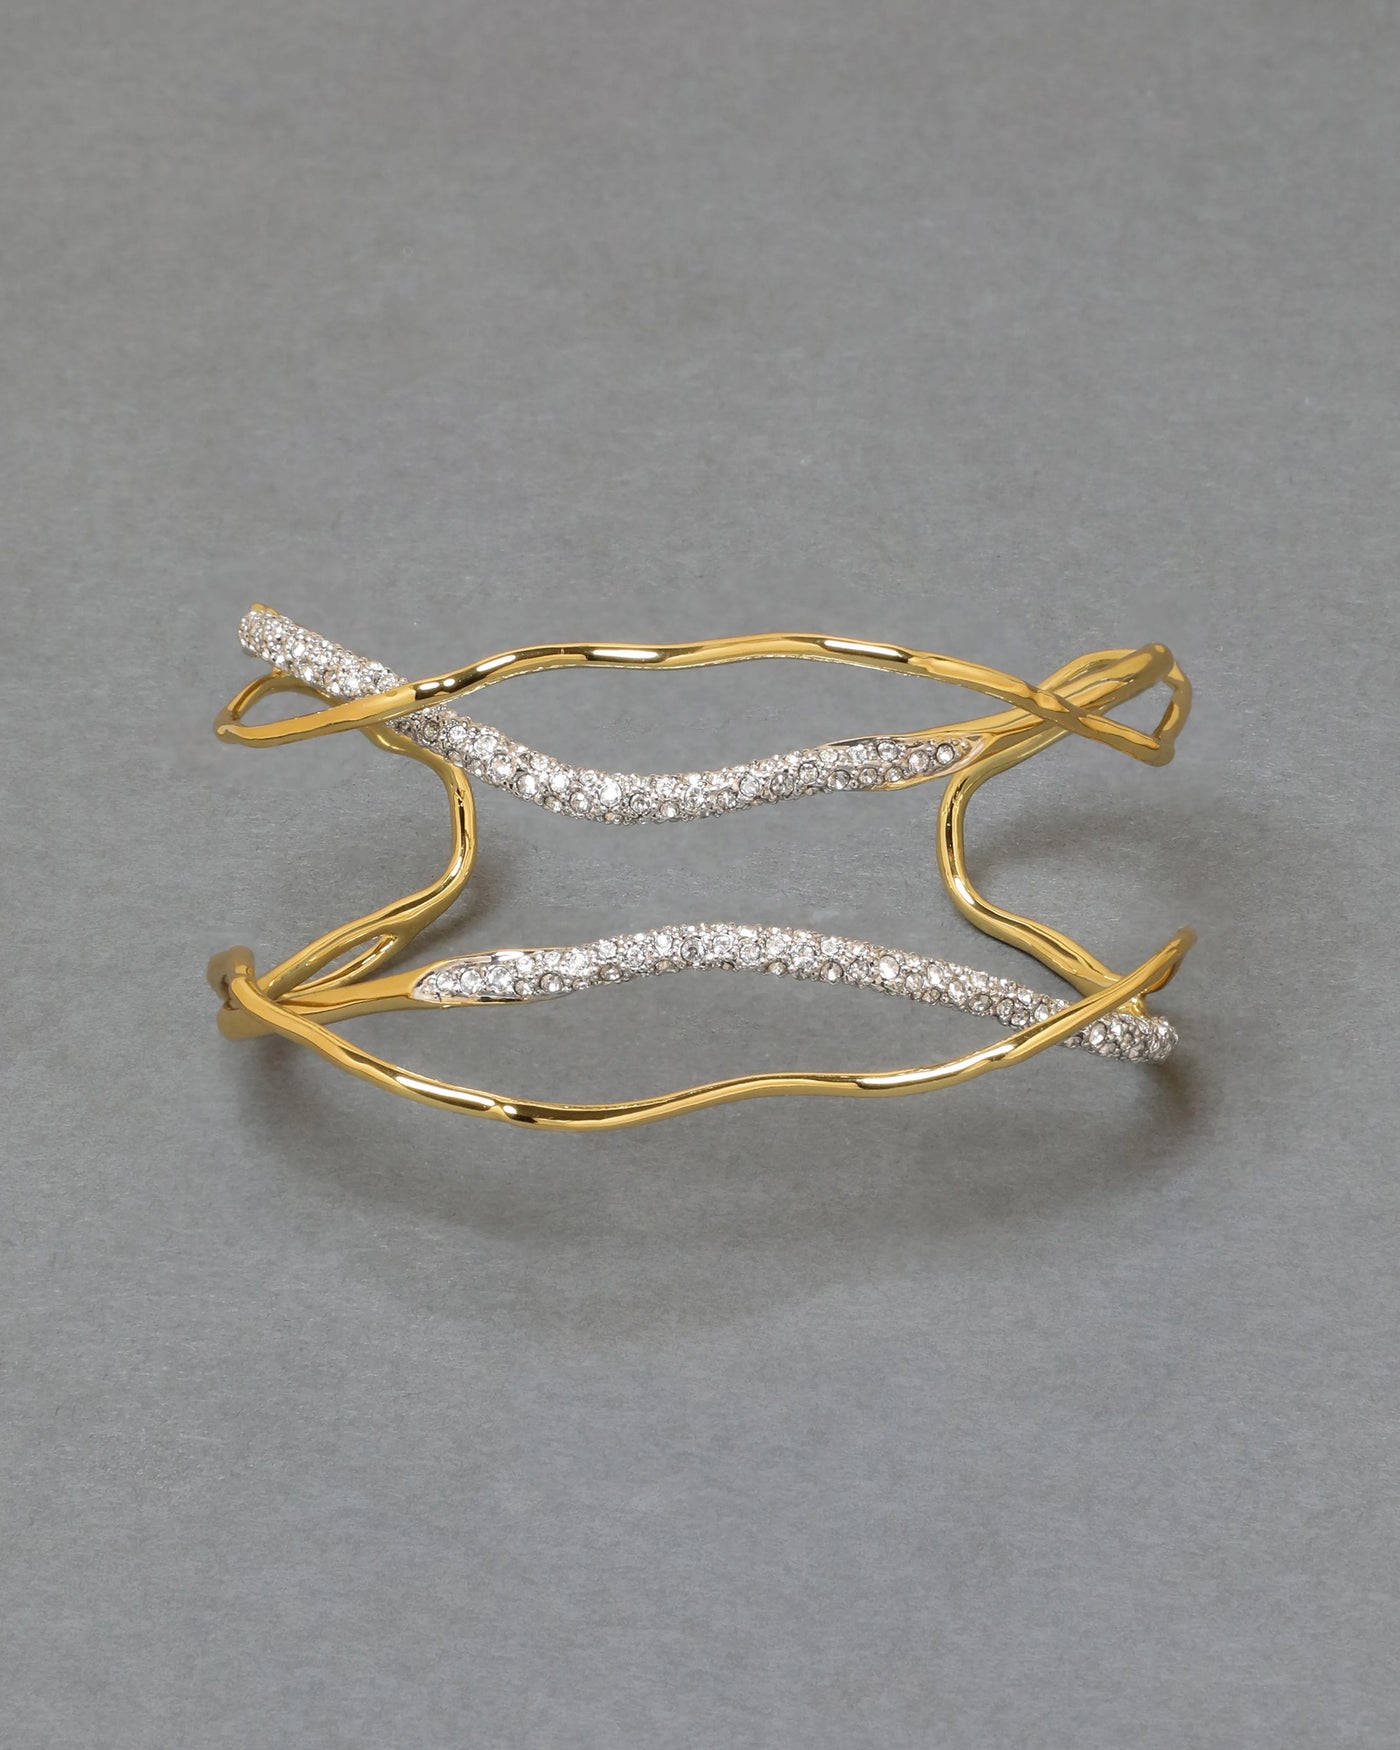 Solanales Crystal Cuff Bracelet - Champagne